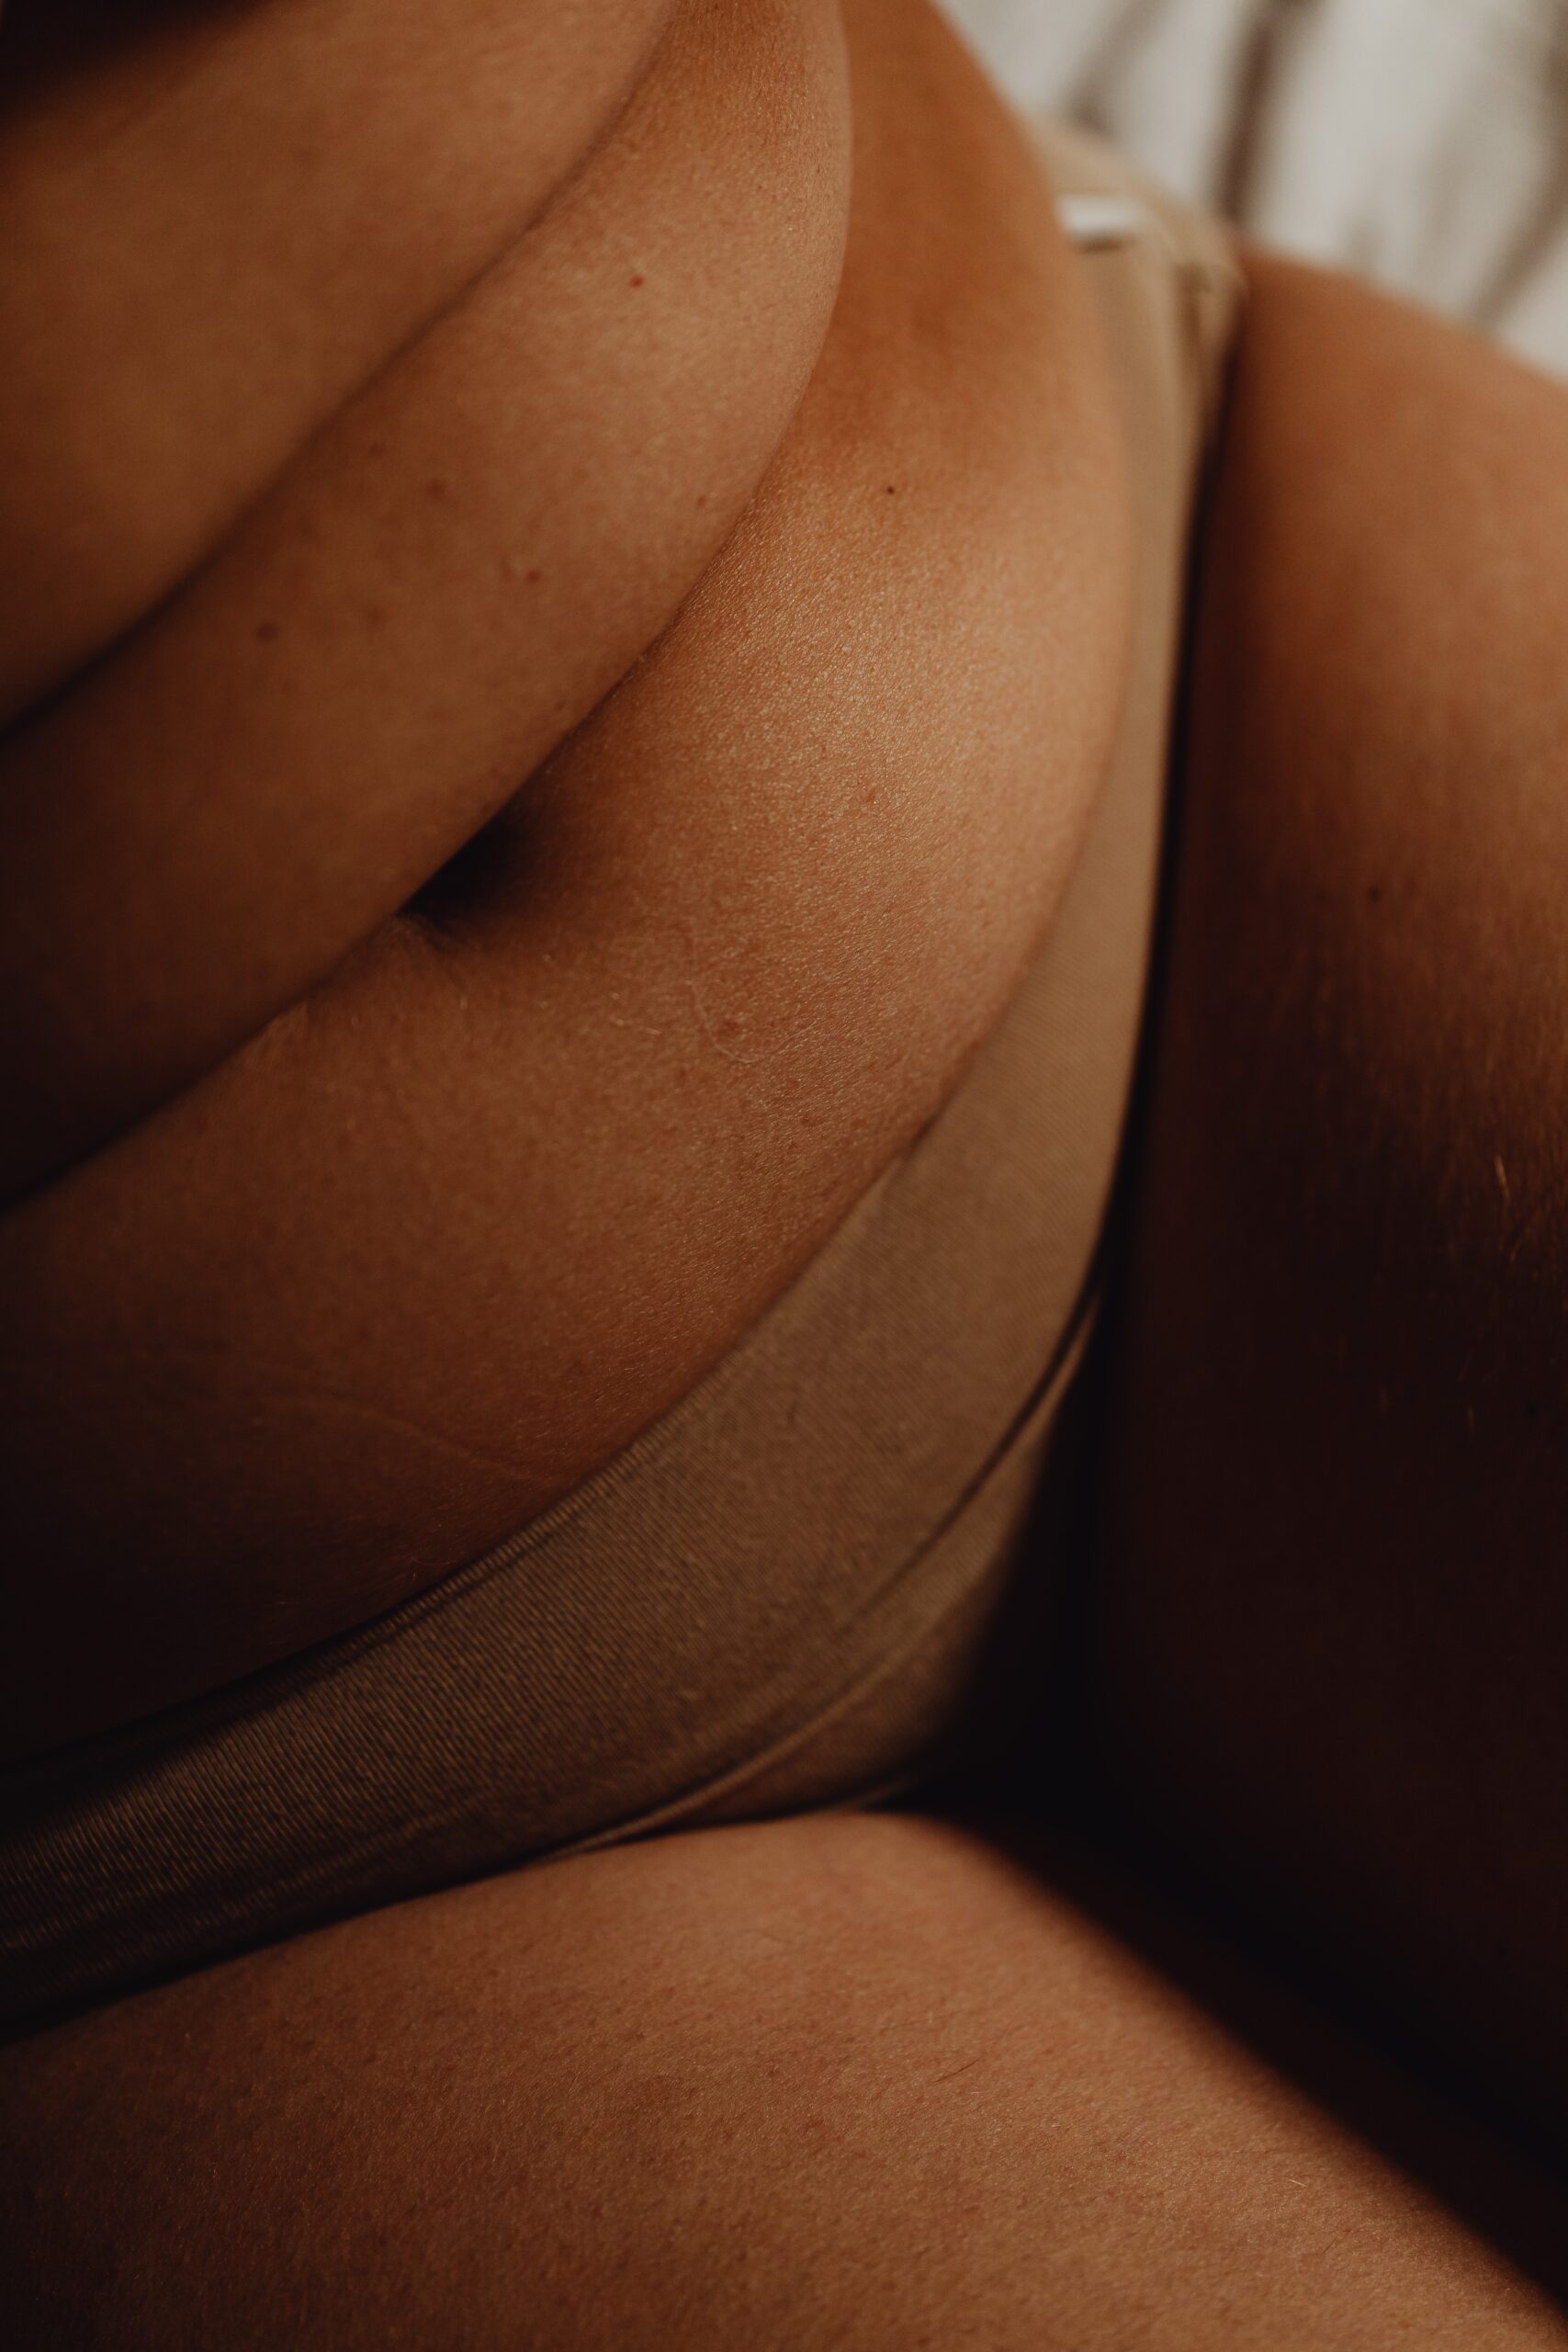 Photo by Karolina Grabowska: https://www.pexels.com/photo/a-woman-s-belly-with-folds-6642952/